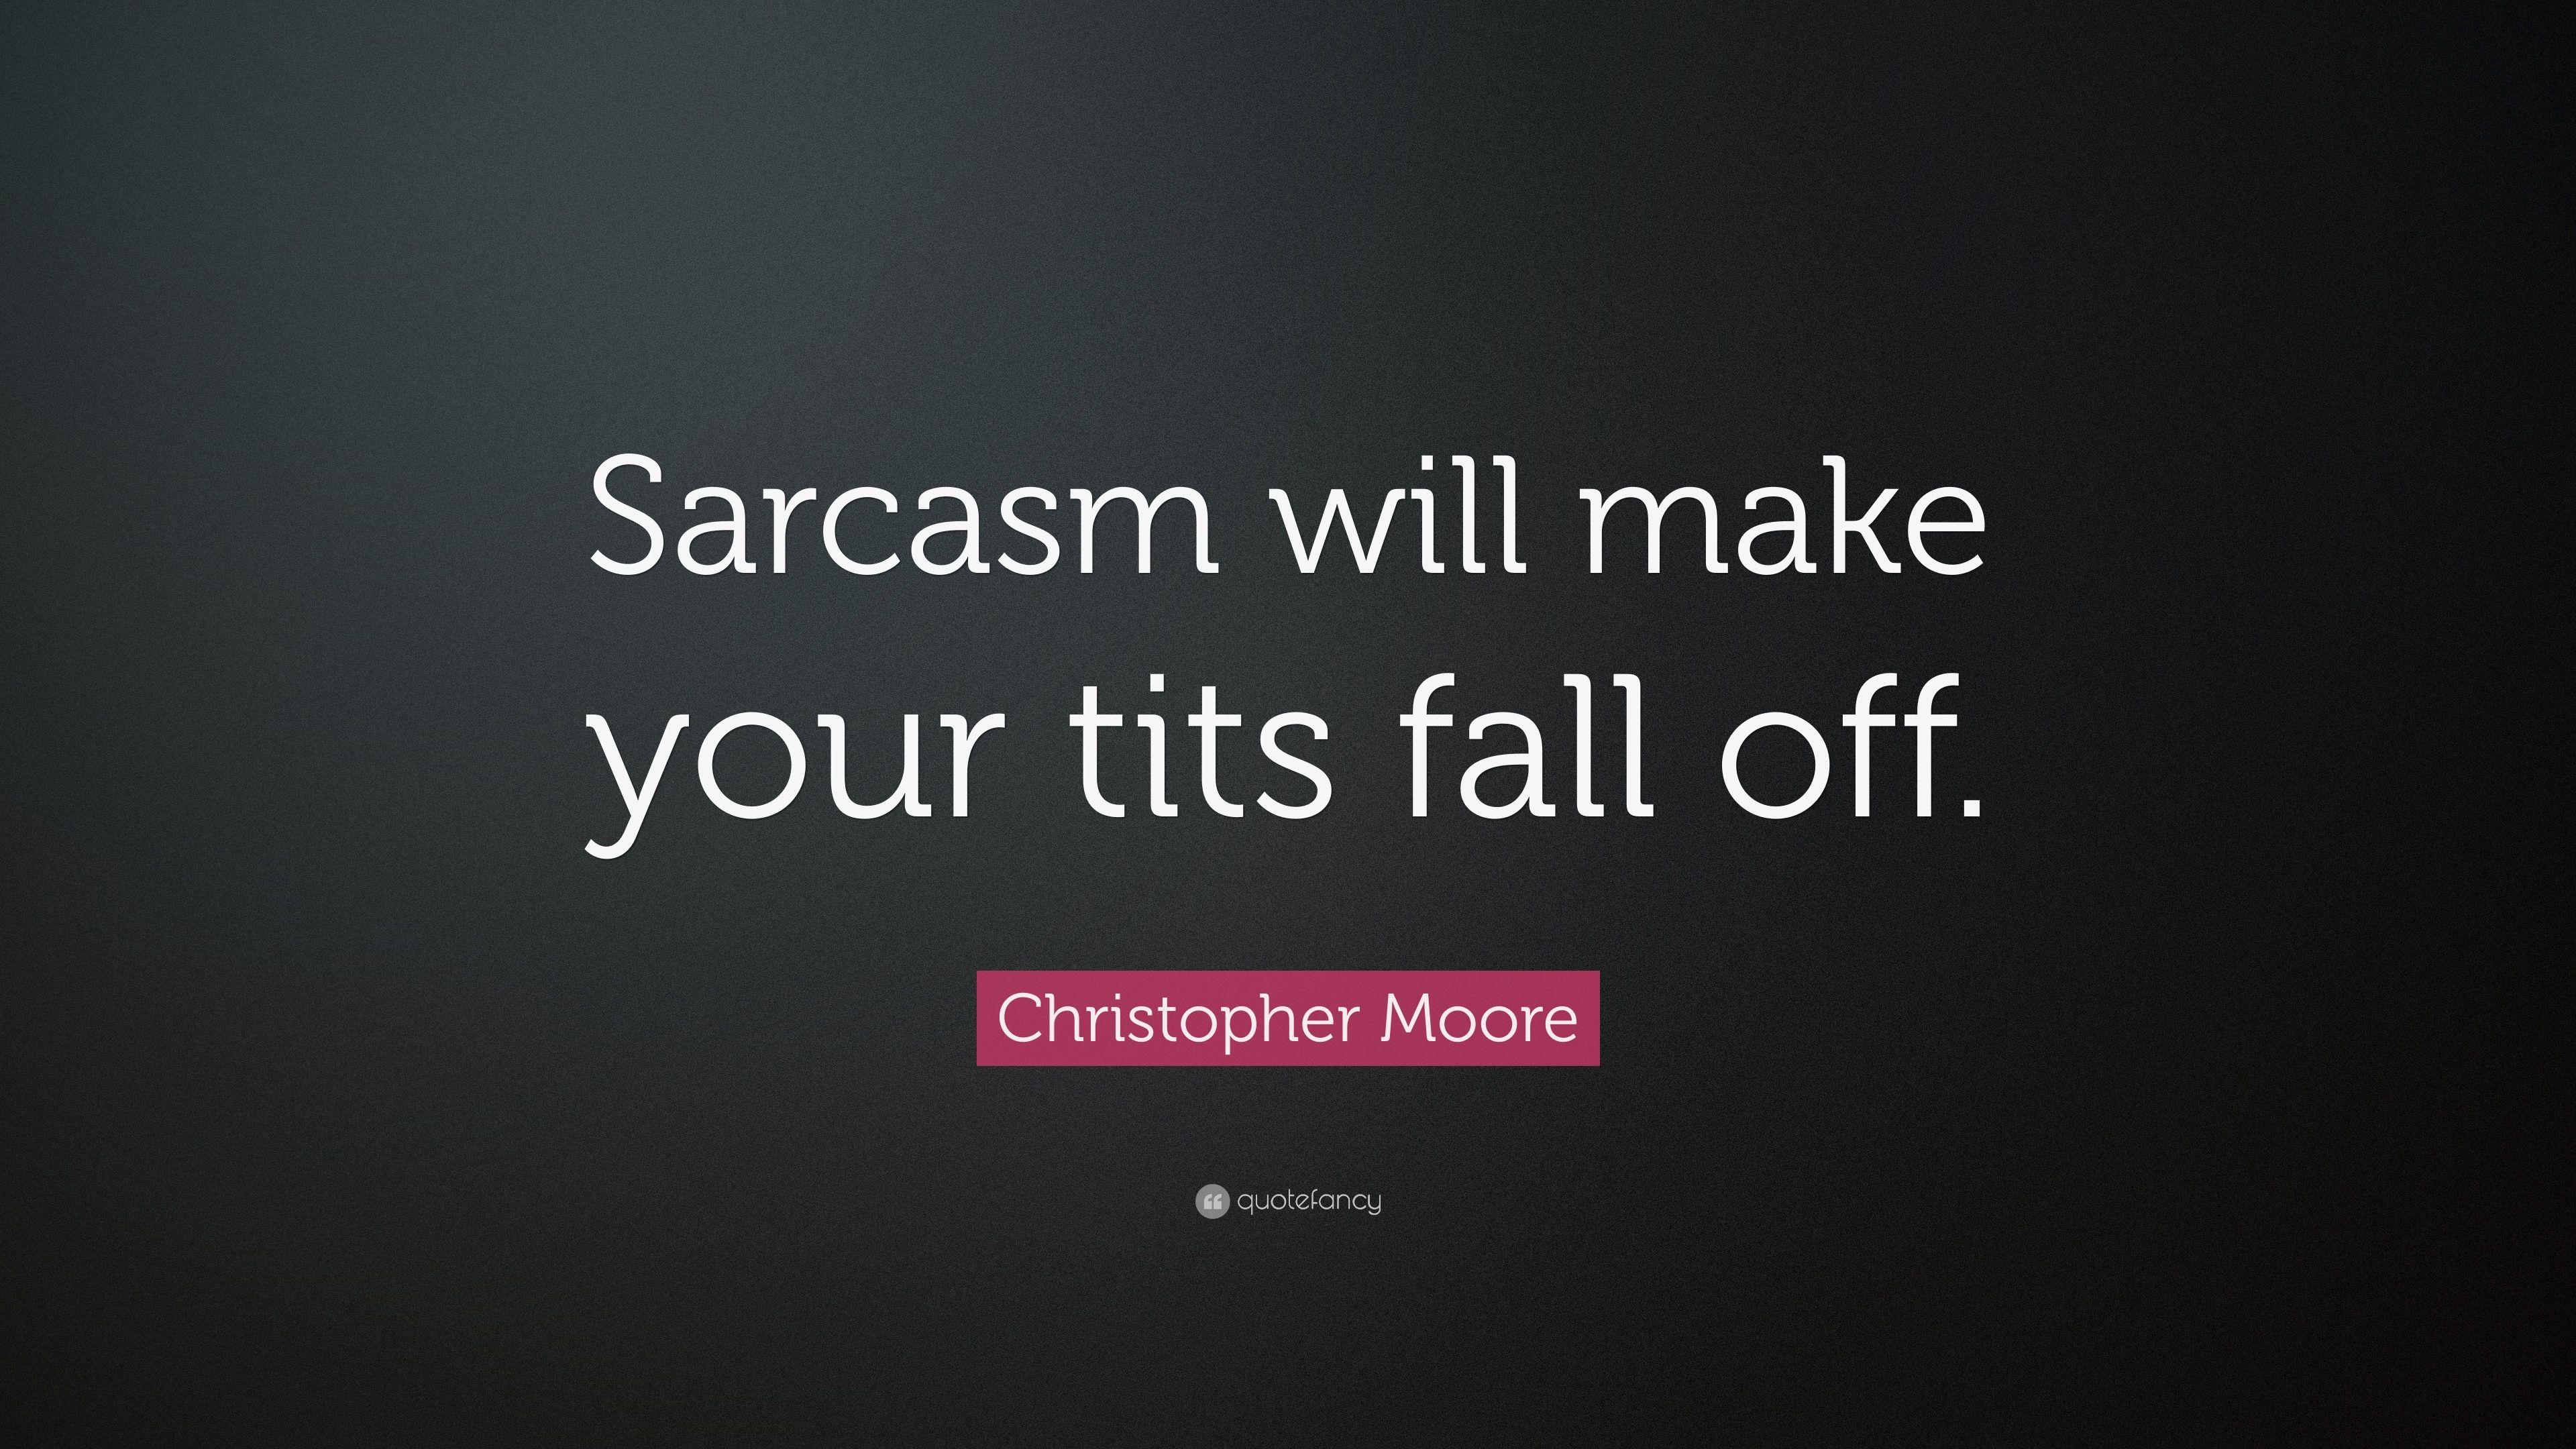 Christopher Moore Quote: “Sarcasm will make your tits fall off